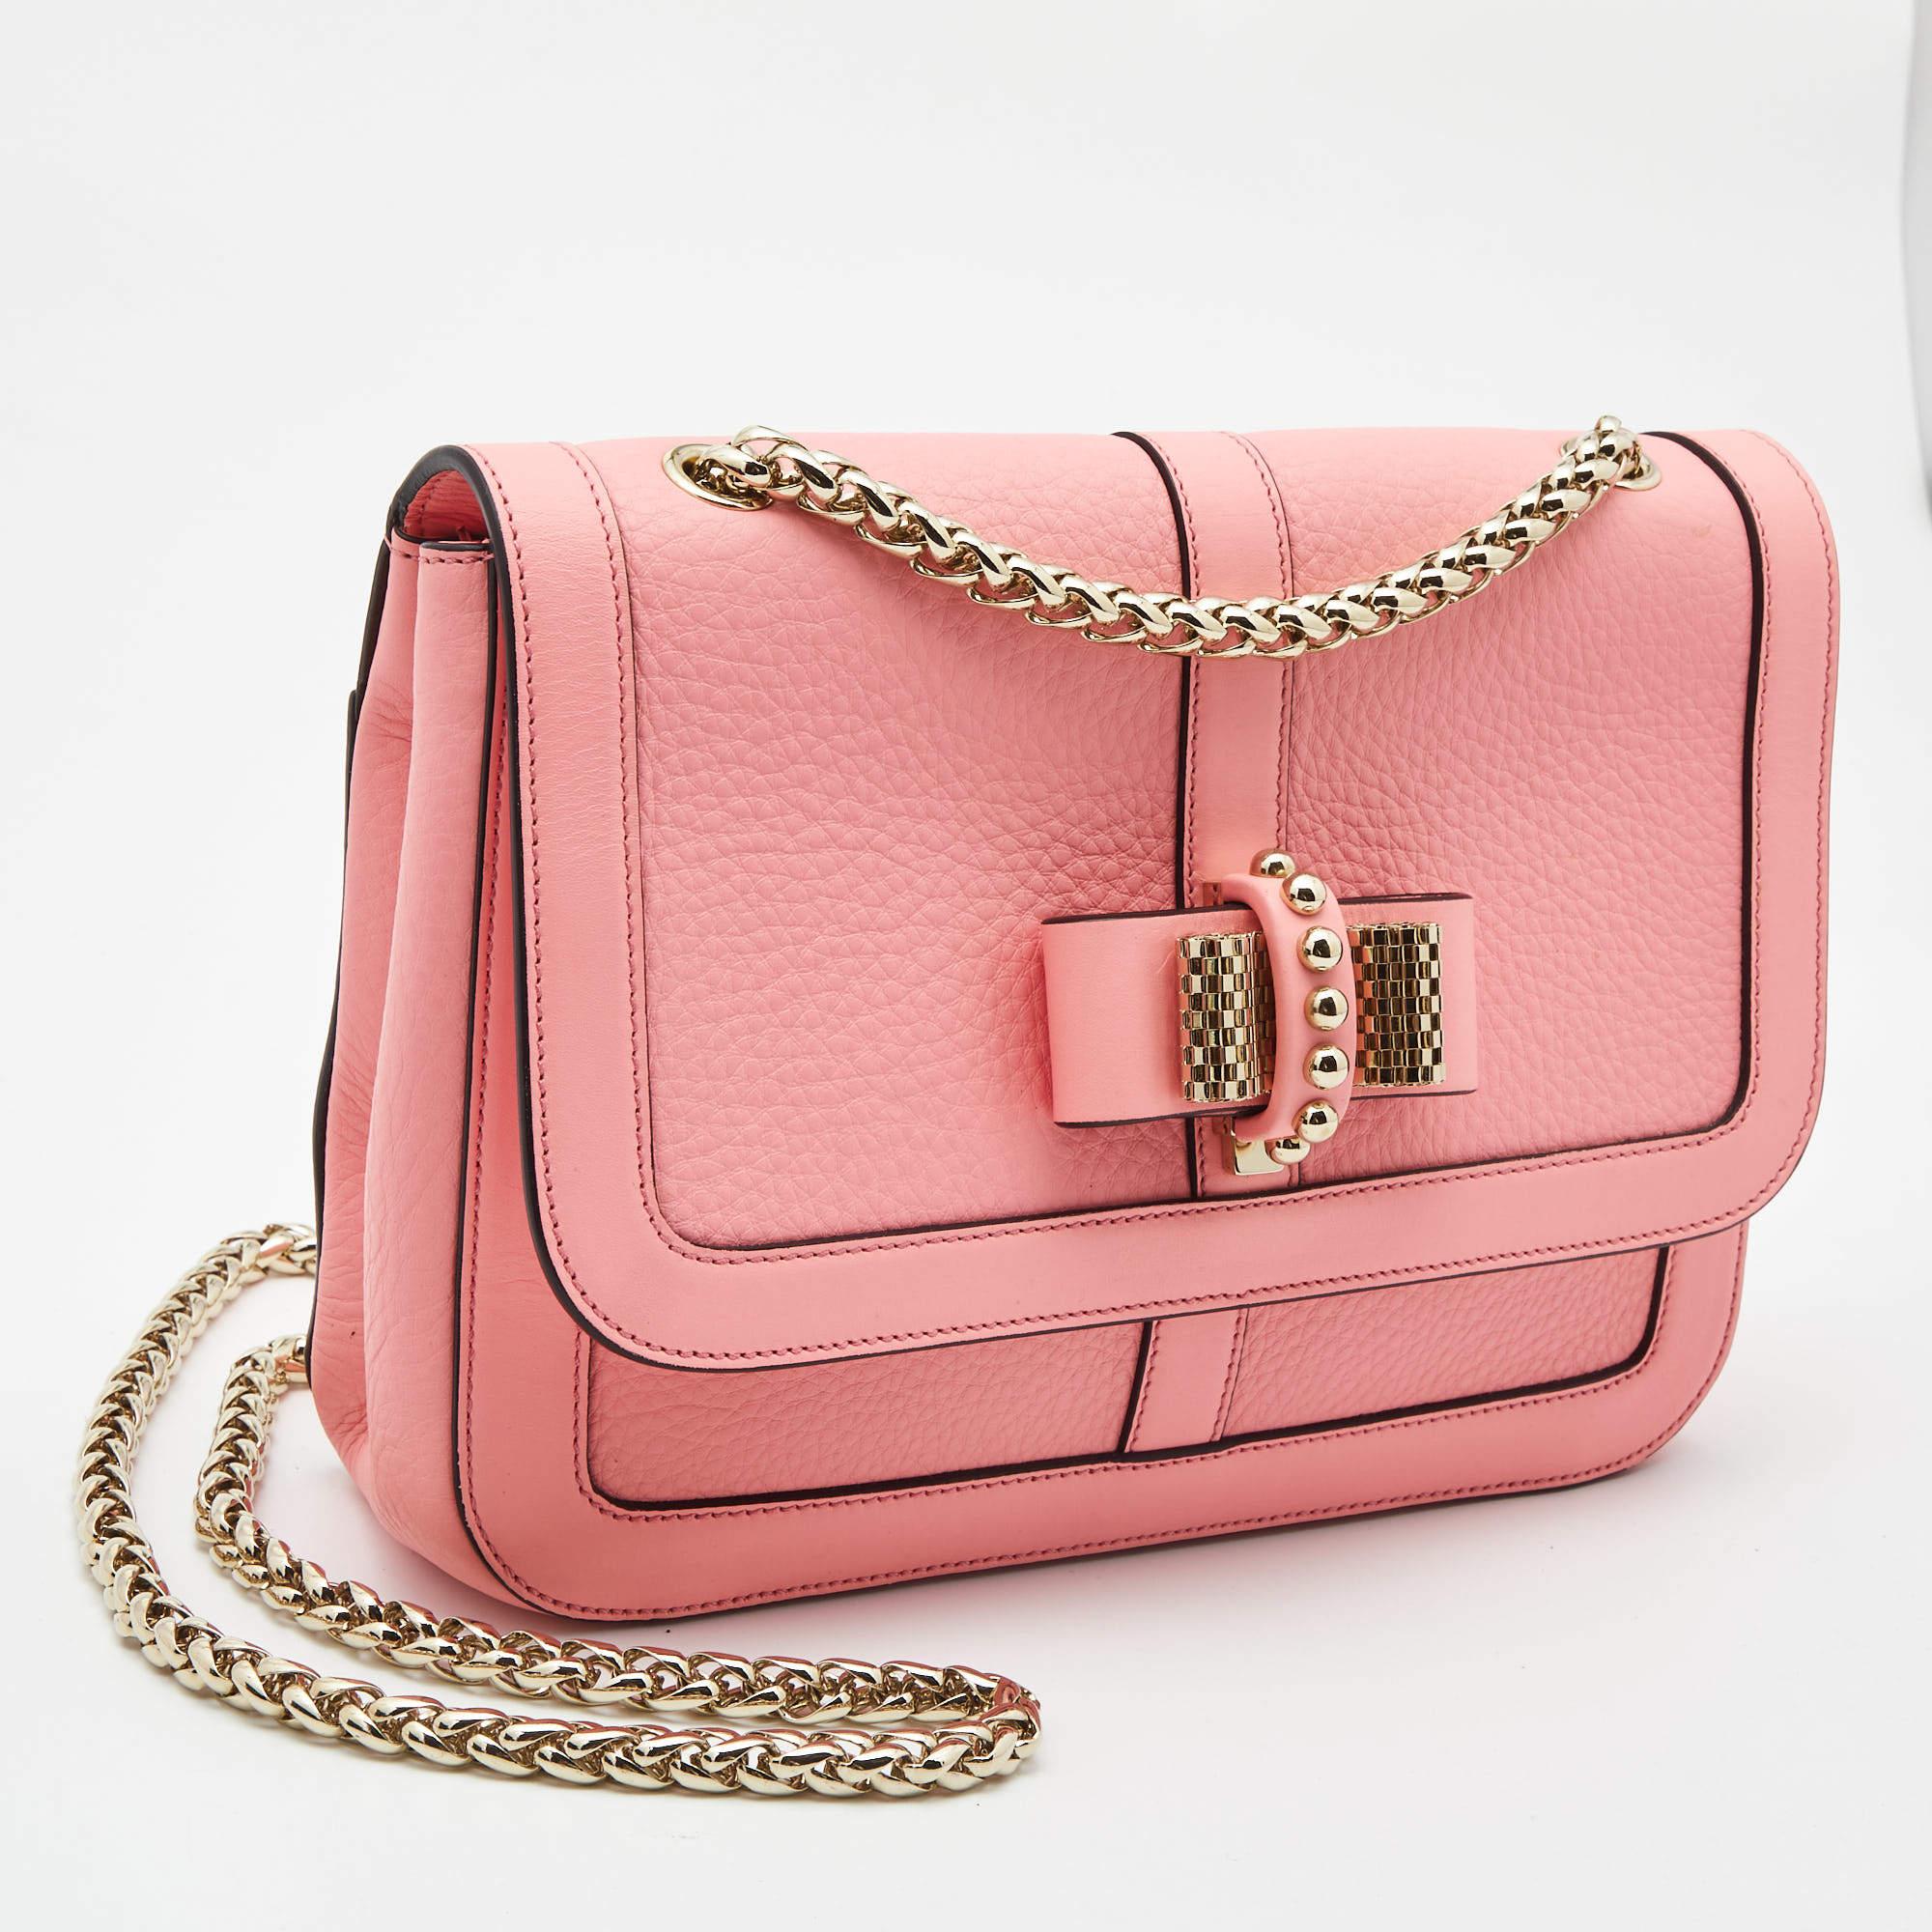 Christian Louboutin Pink Leather Sweet Charity Shoulder Bag 3